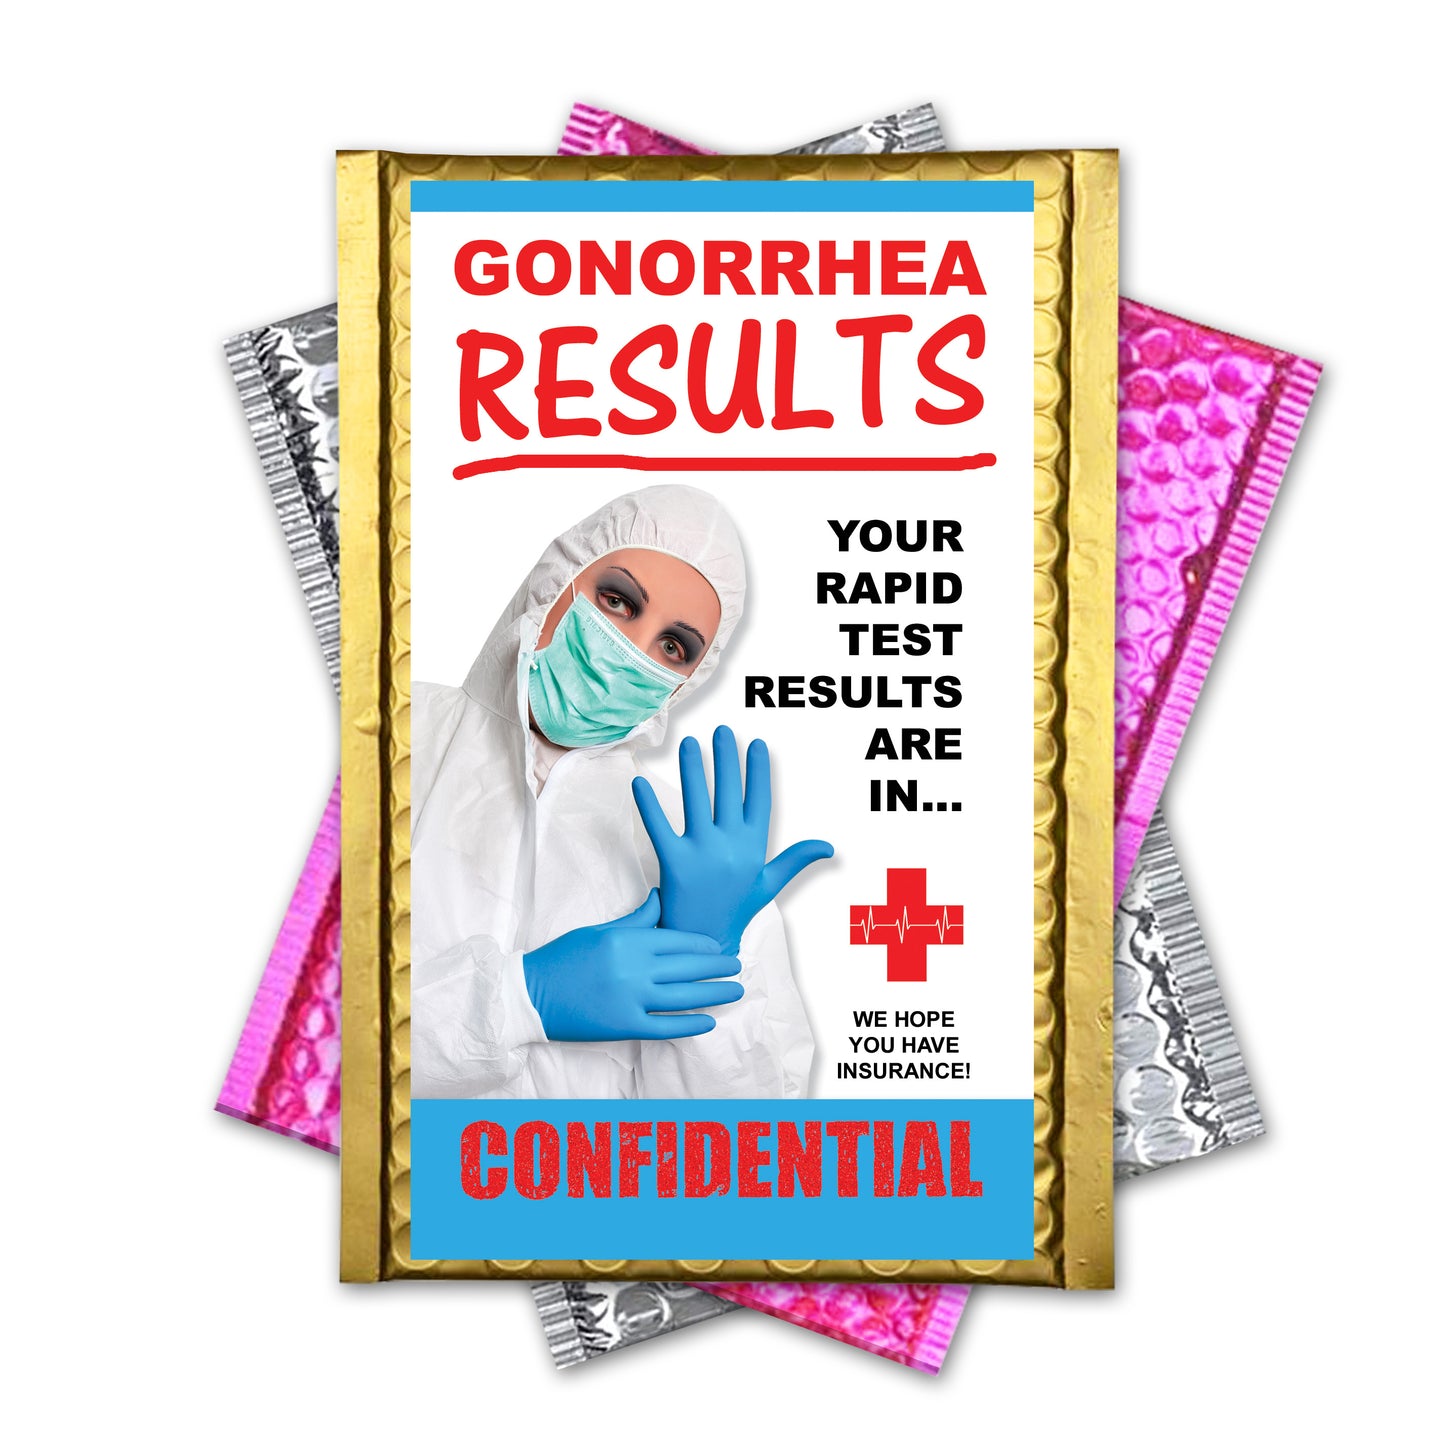 Gonorrhea Results Mail a Prank Gag